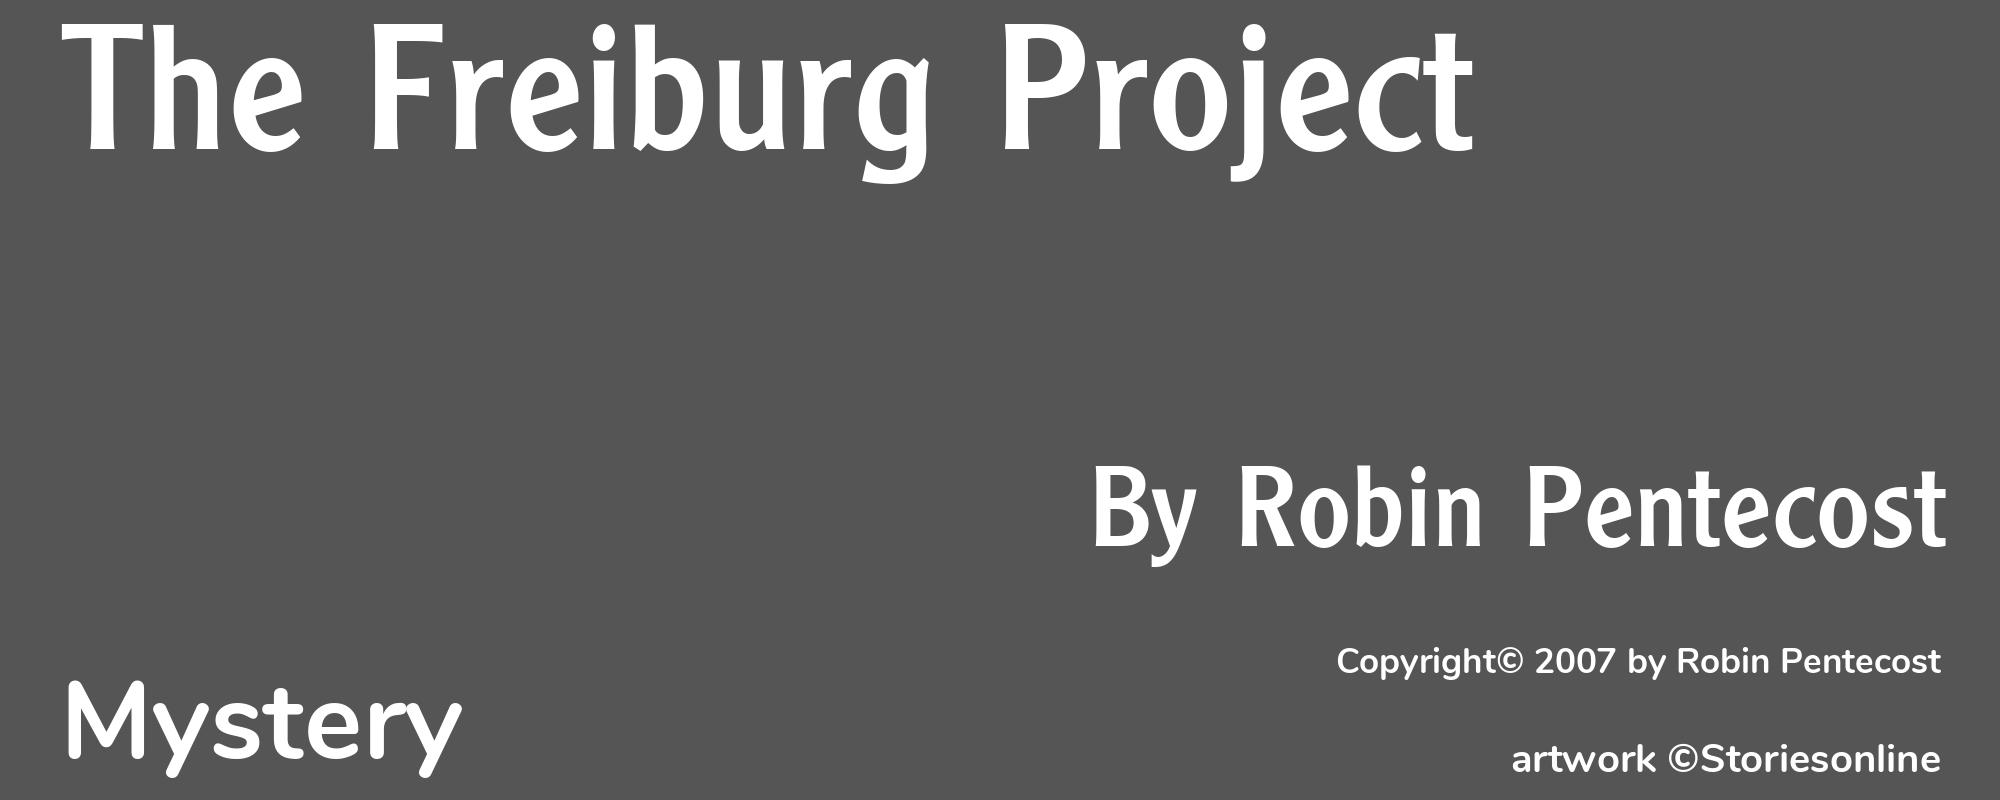 The Freiburg Project - Cover